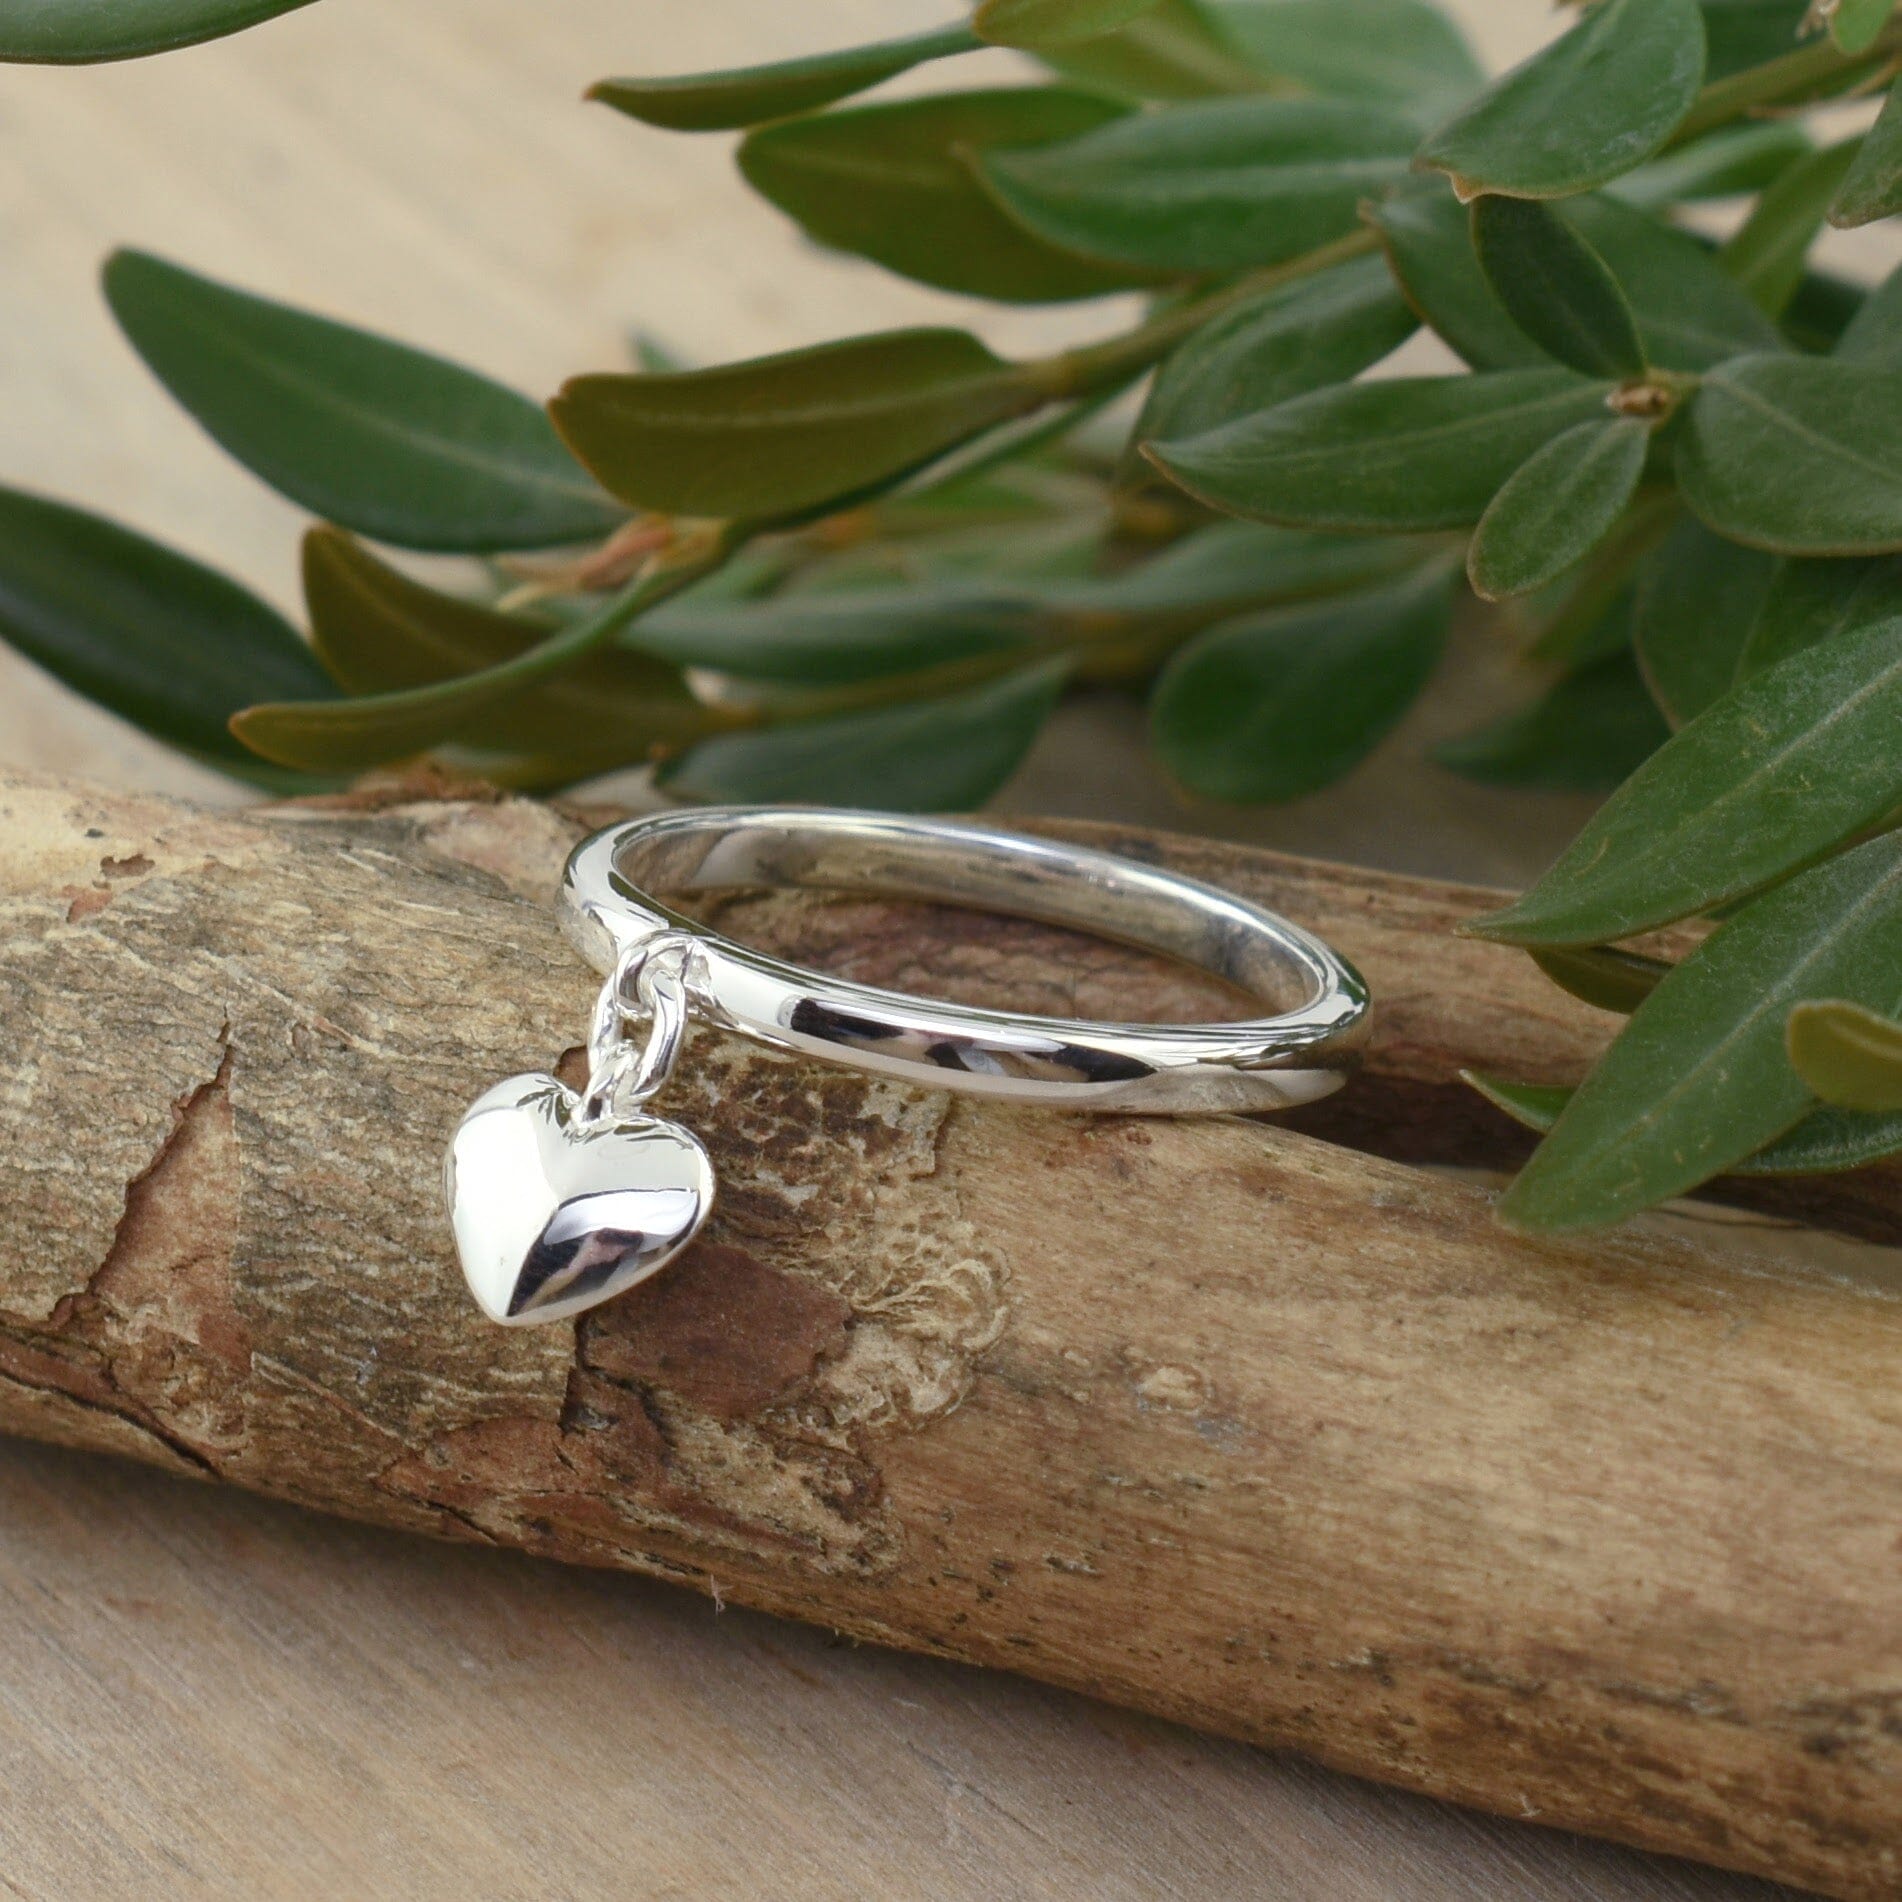 dainty .925 sterling silver ring with a dangling heart